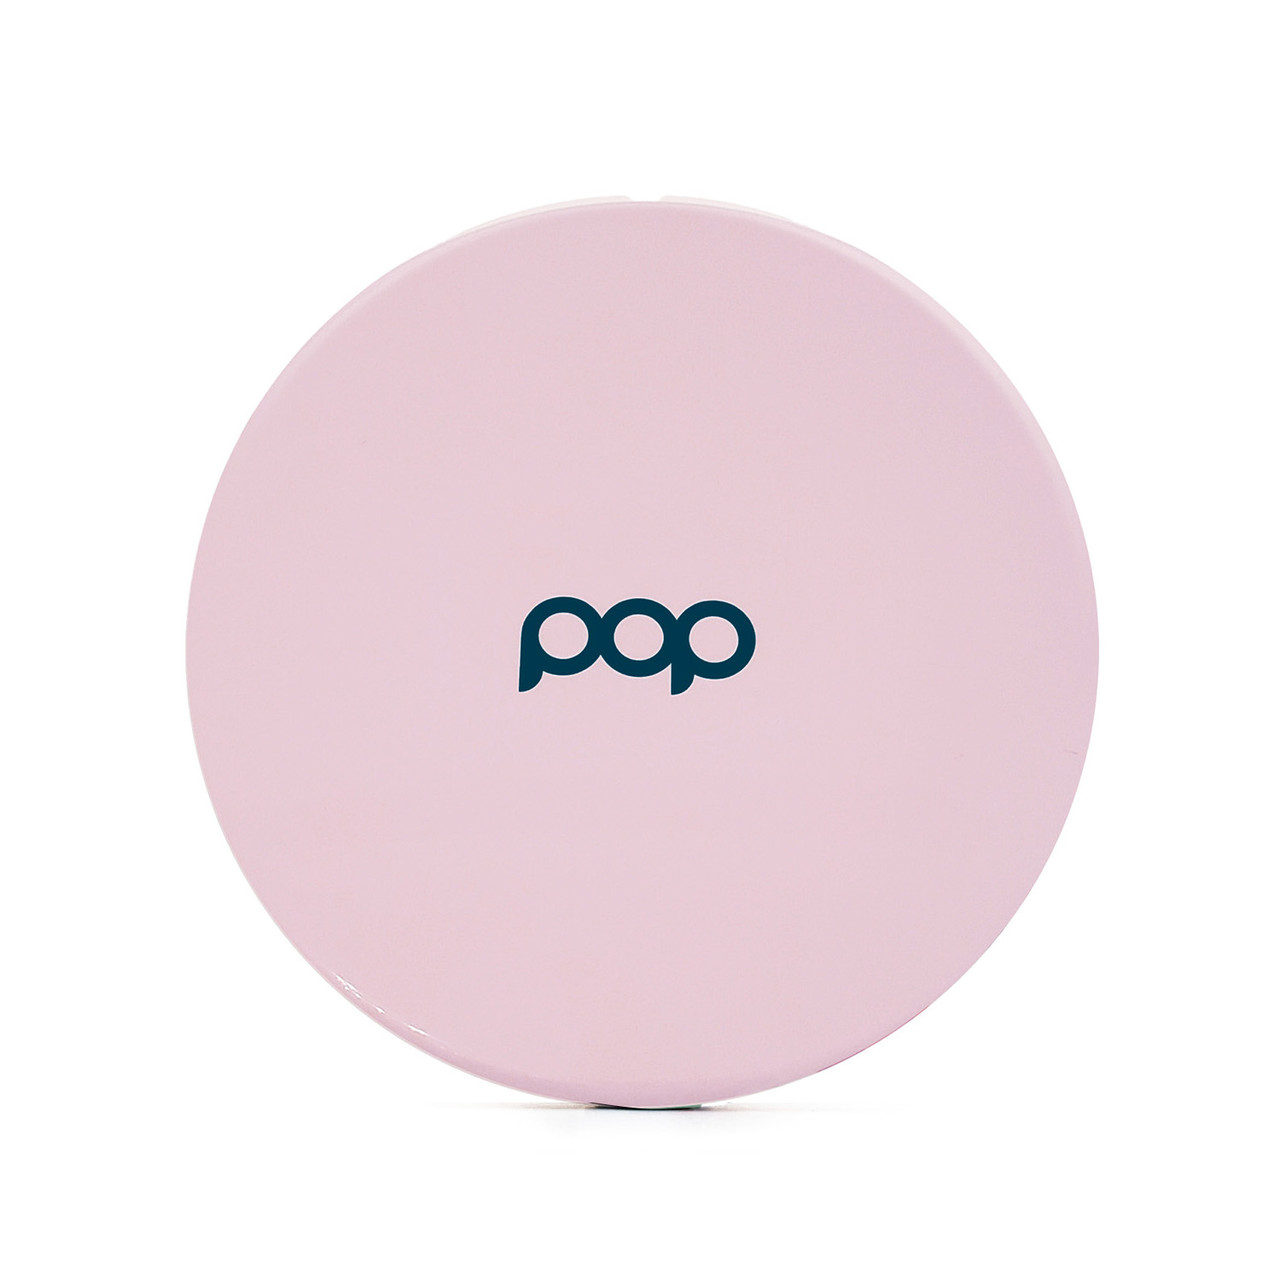 LED Compact Mirror - Shop Popsonic